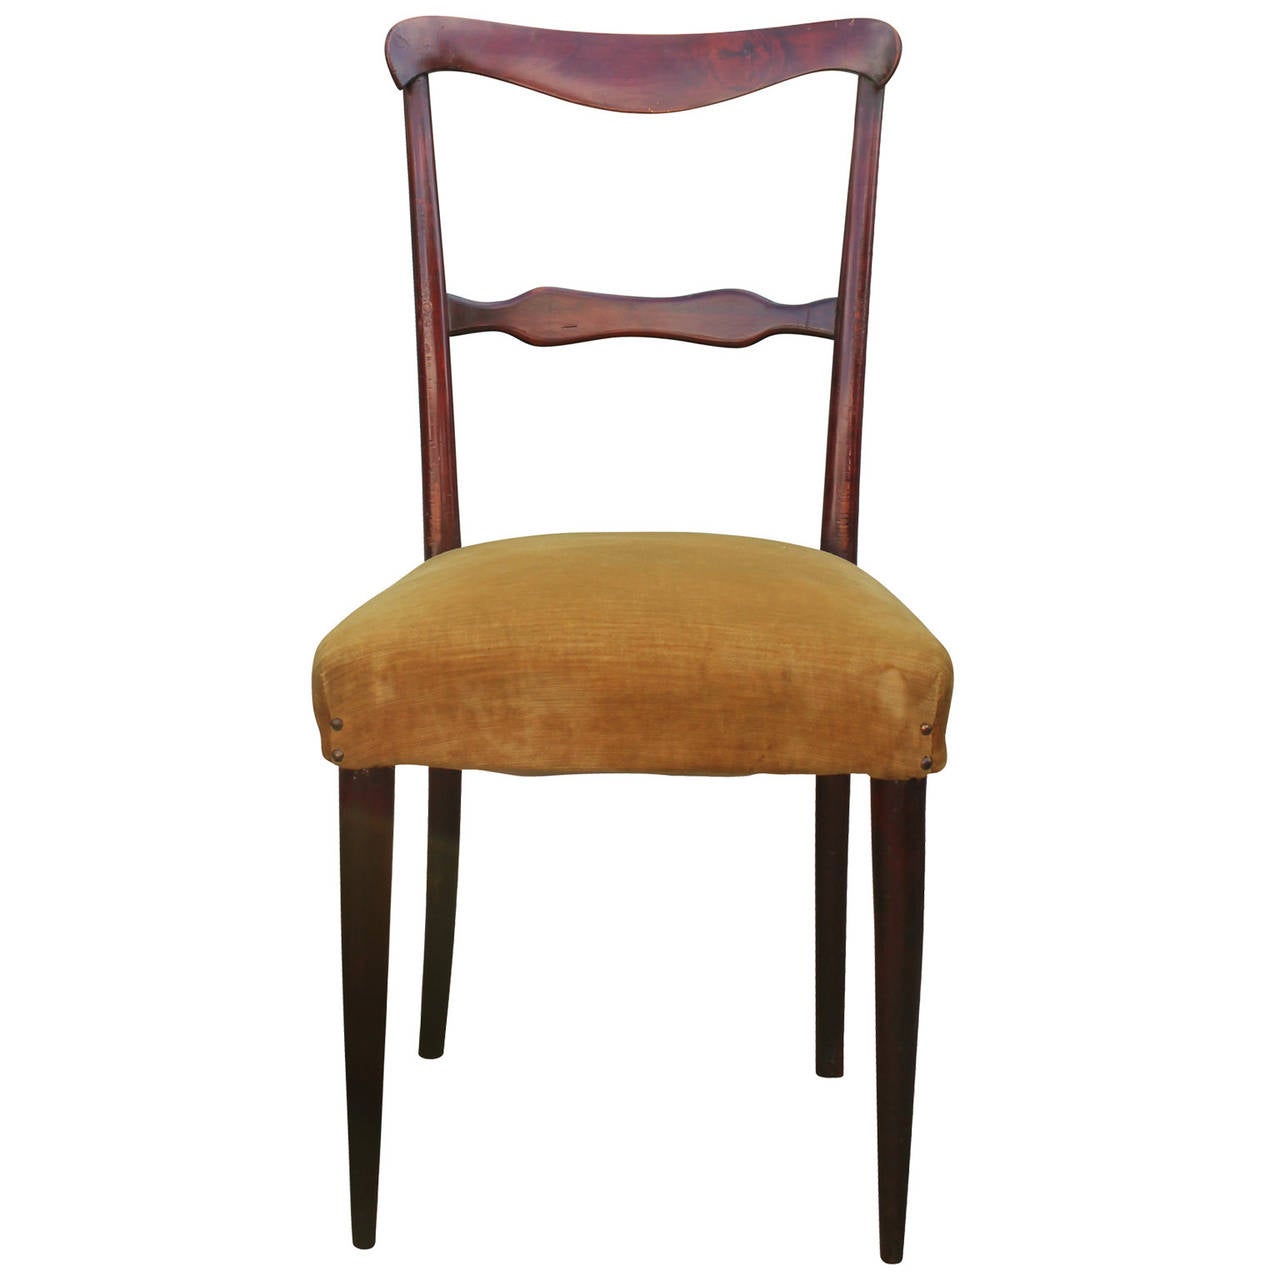 Elegant set of six Italian dining chairs. Chairs have wonderful curved lines and are finished in a dark walnut. Chairs retain original yellow upholstery which needs replacing. The chairs are in good original condition. They can be refinished and